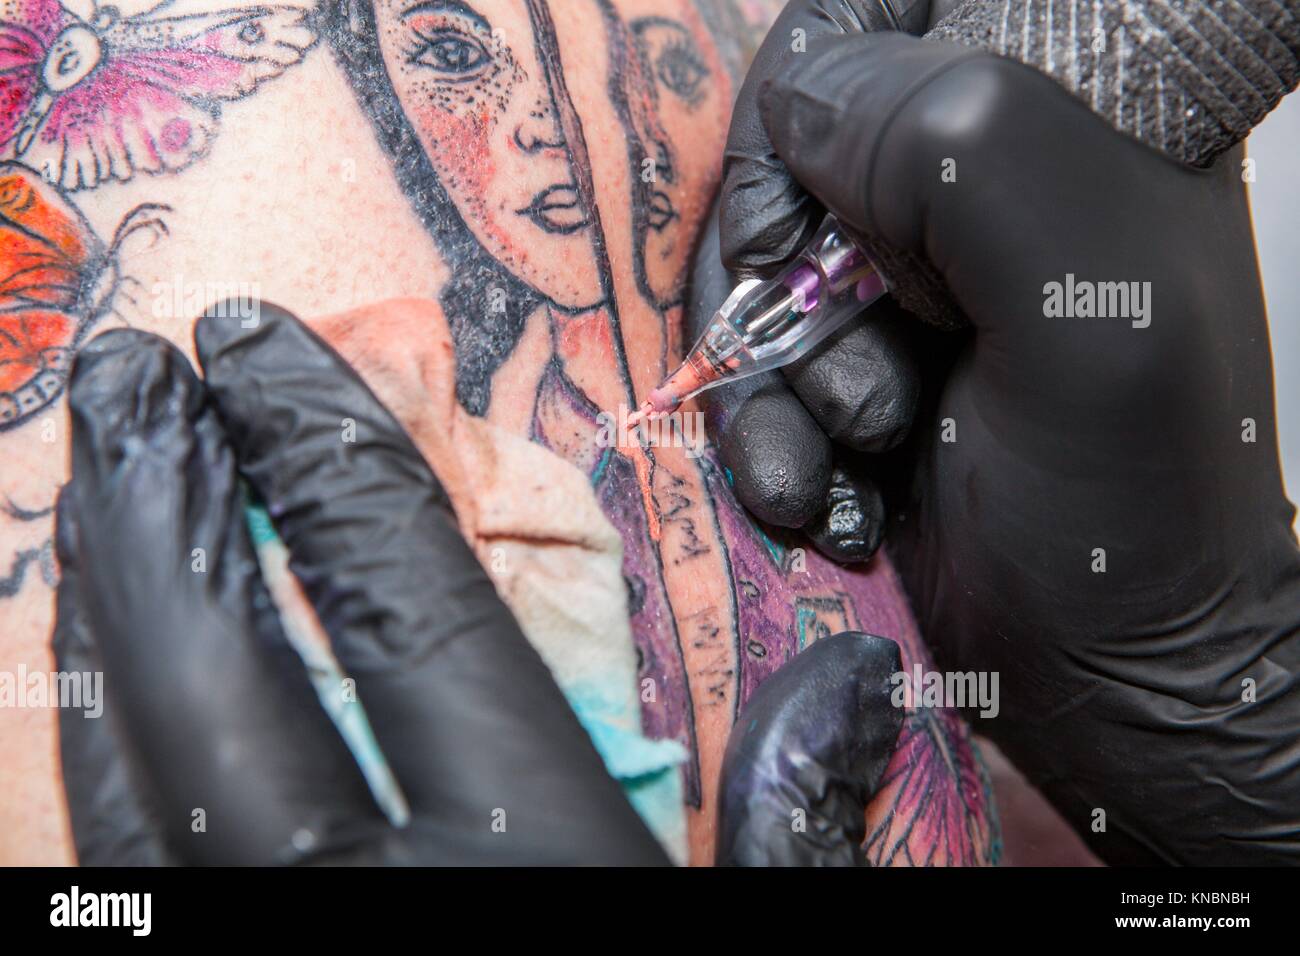 Tattoo artist applies tattoo to arm. She is filling with flesh-coloured ink the tattoo. Stock Photo